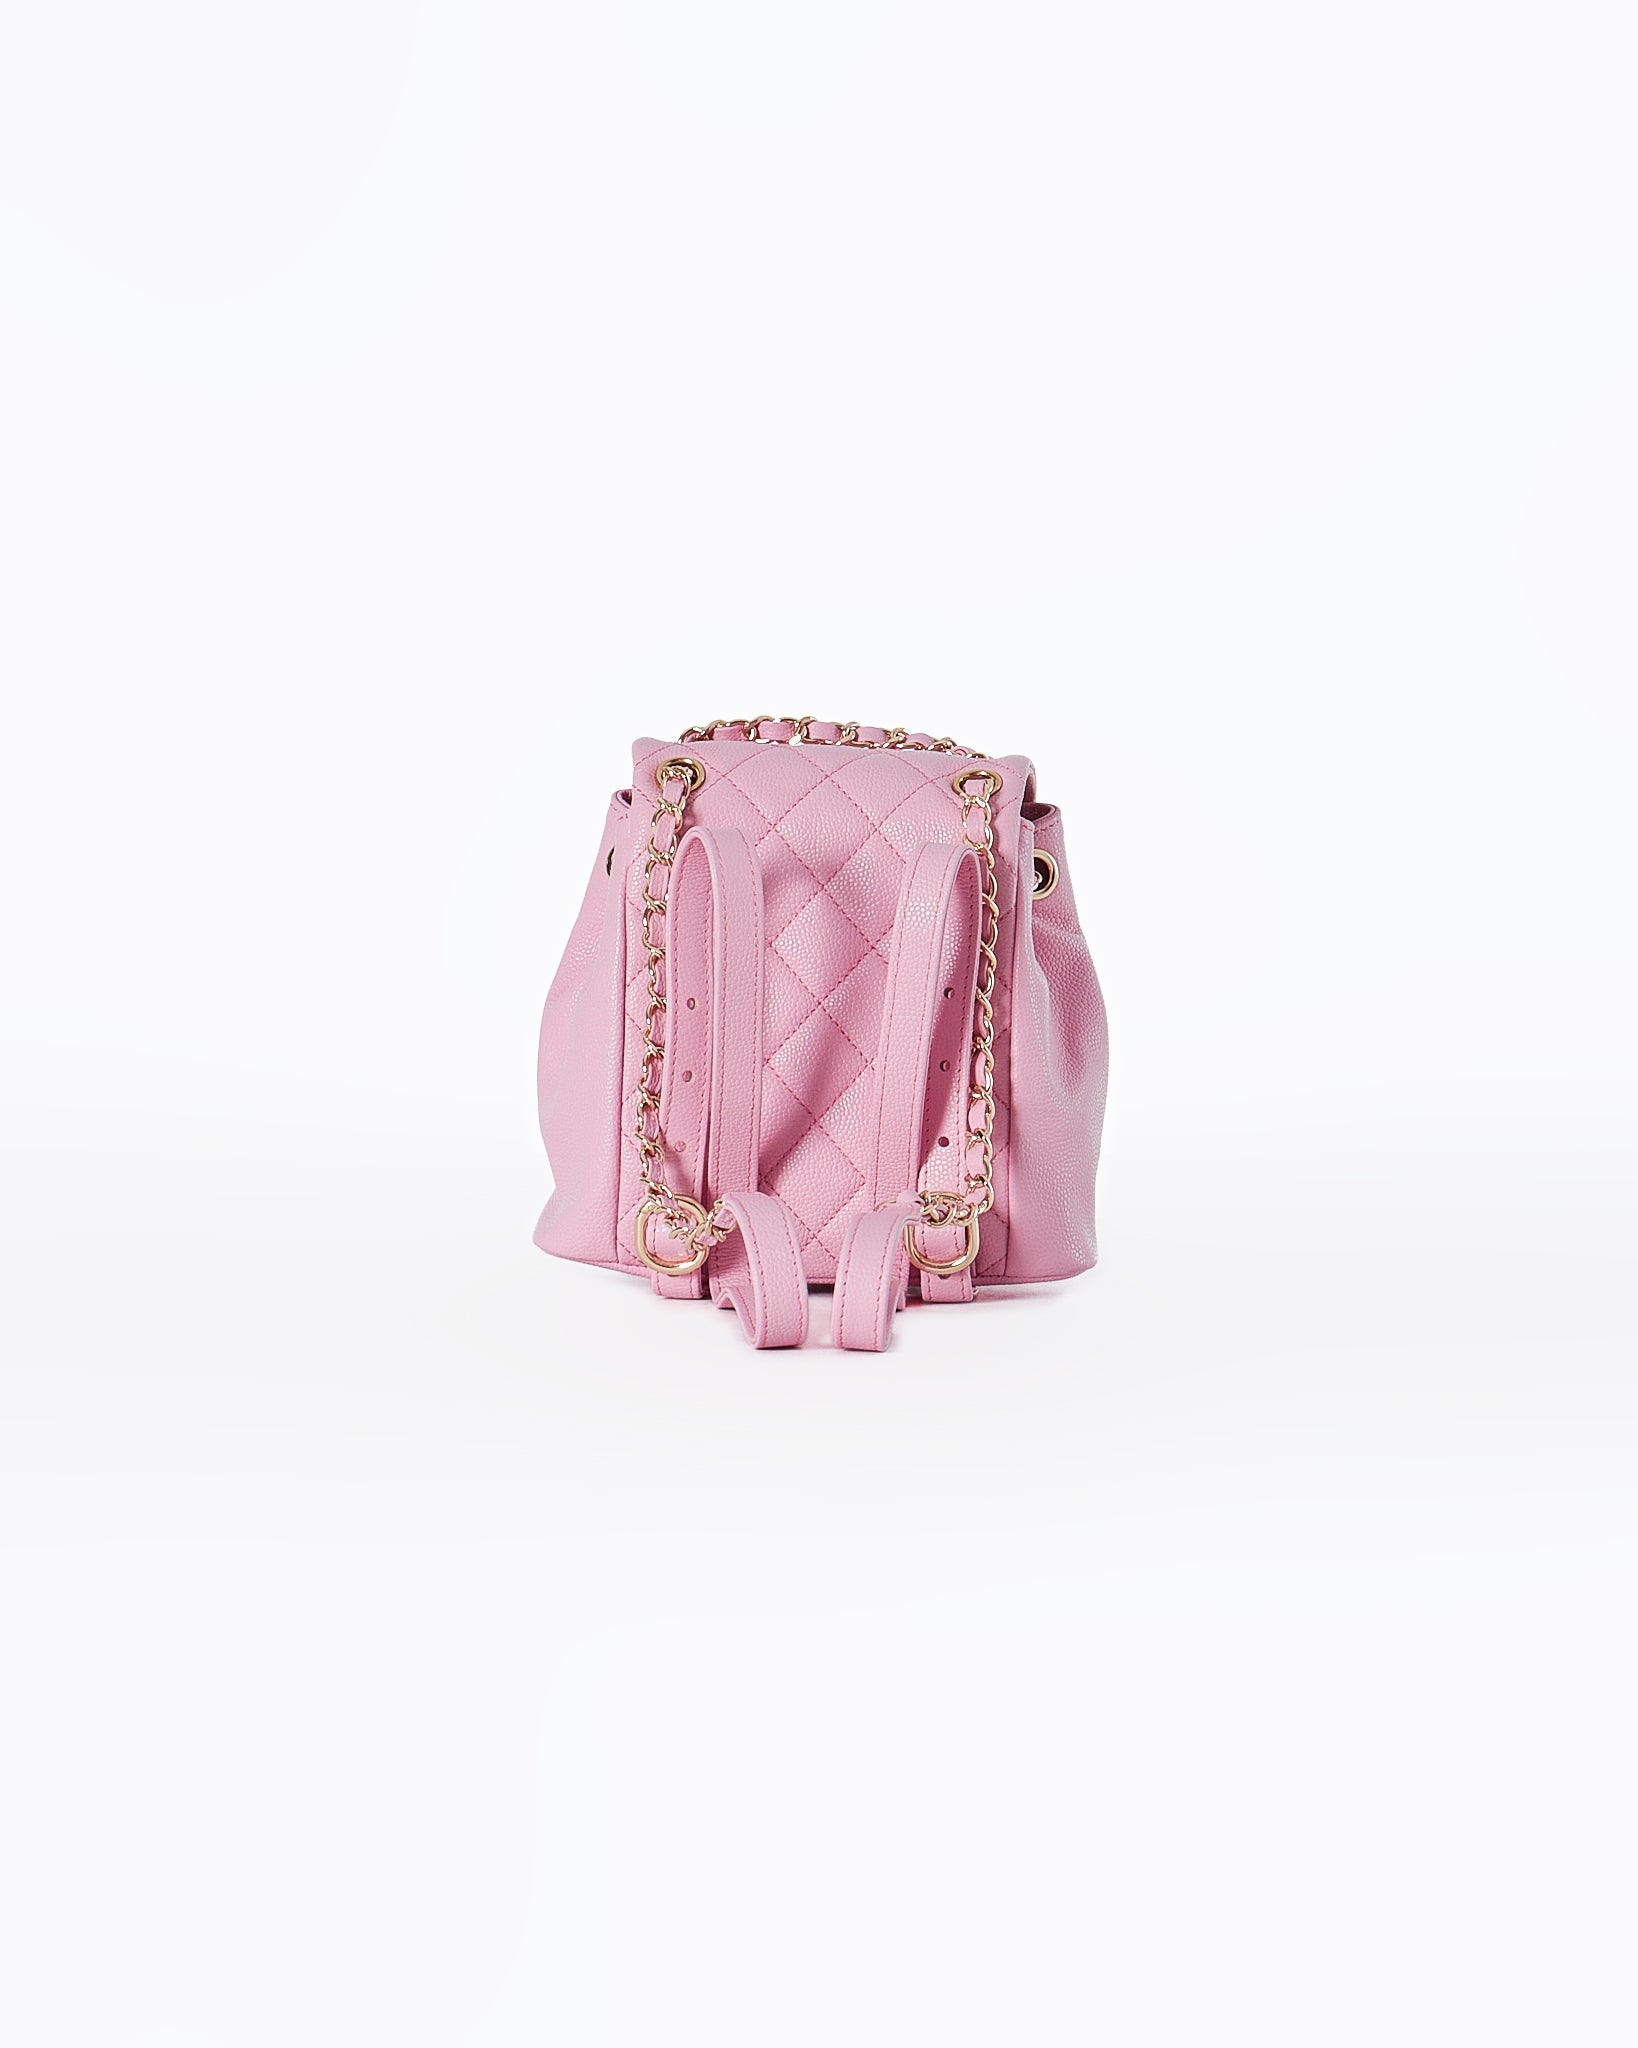 Chanel Lady Mini Backpack 279 - MOI OUTFIT